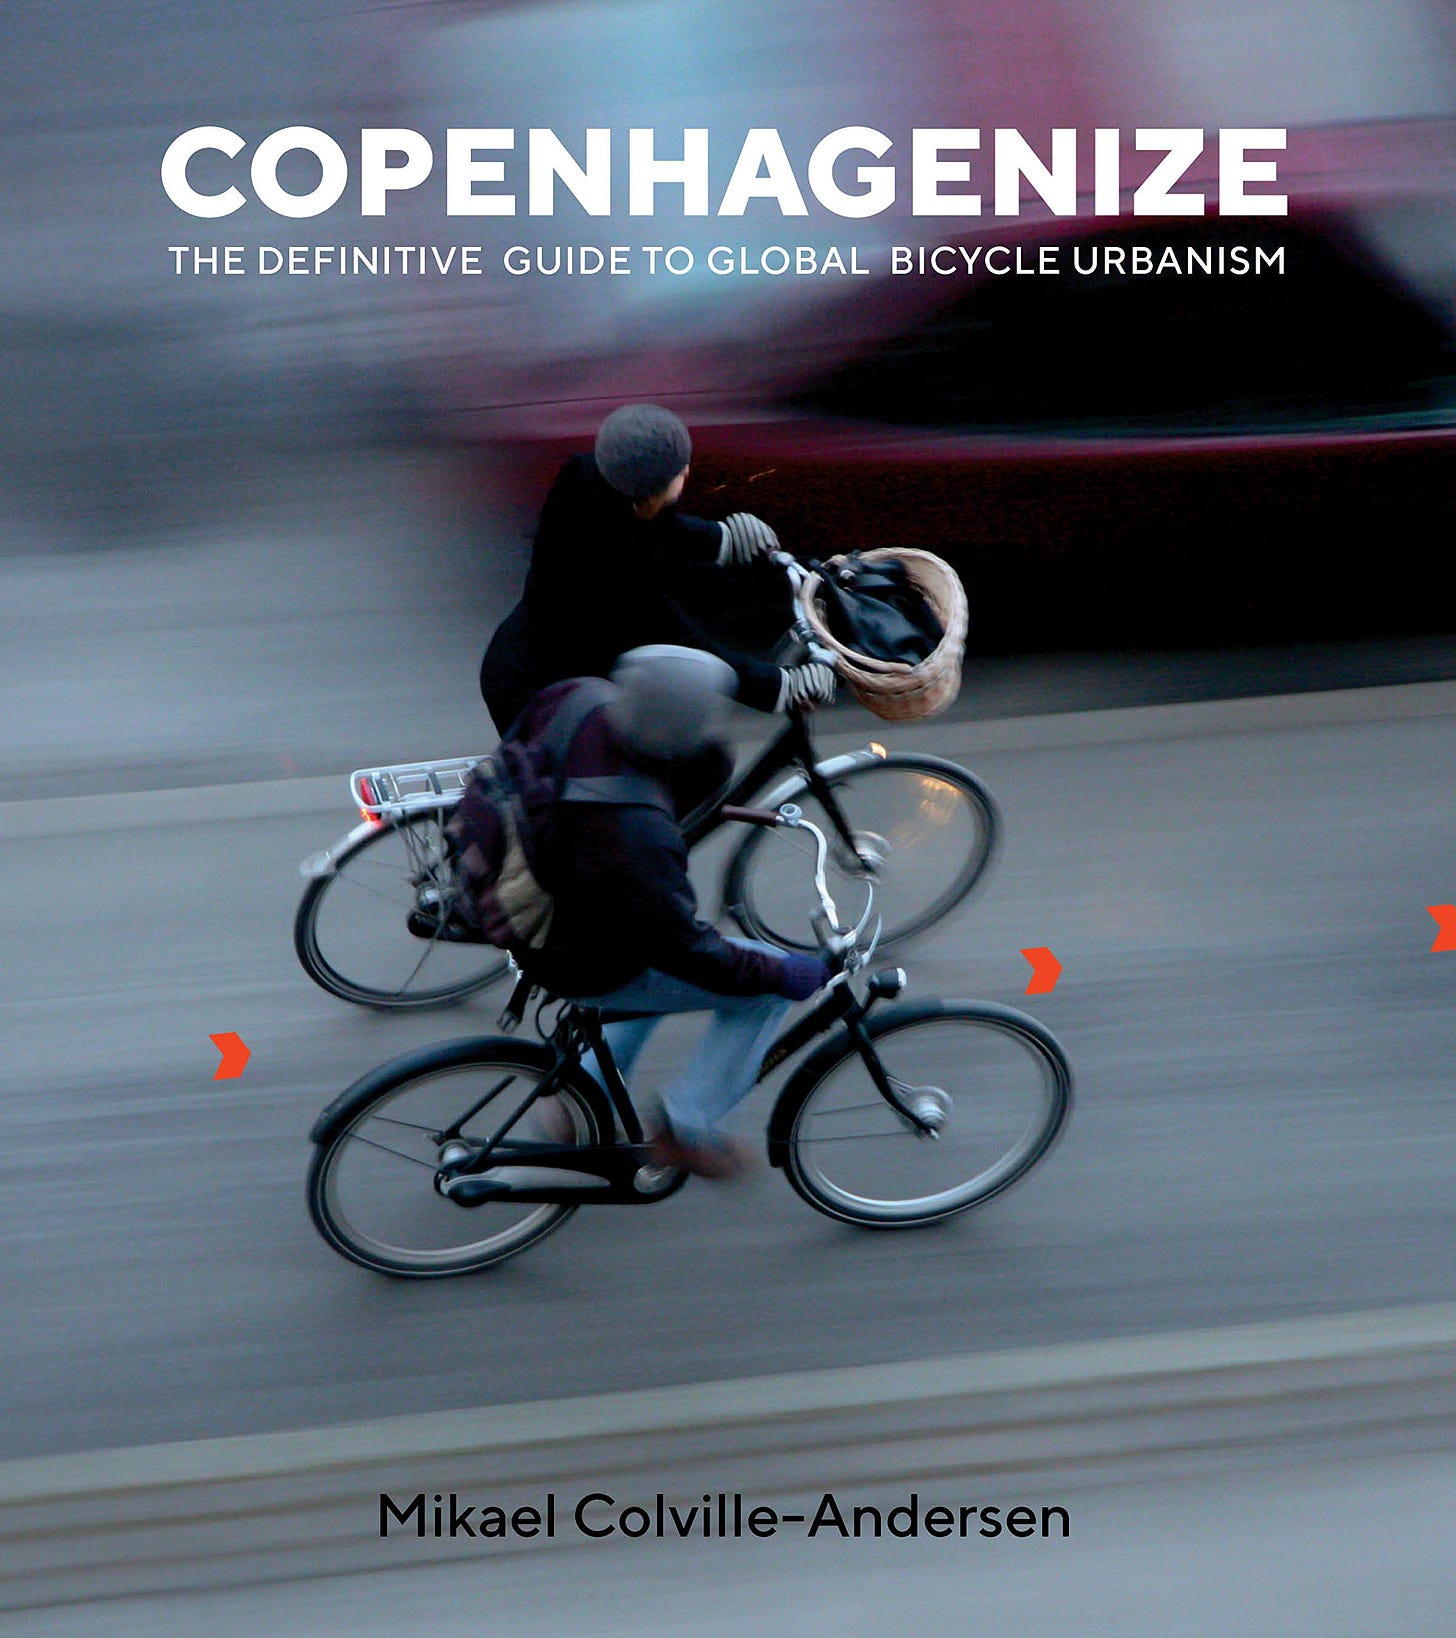 Copenhagenize: The Definitive Guide to Global Bicycle Urbanism:  Colville-Andersen, Mikael: 9781610919388: Amazon.com: Books